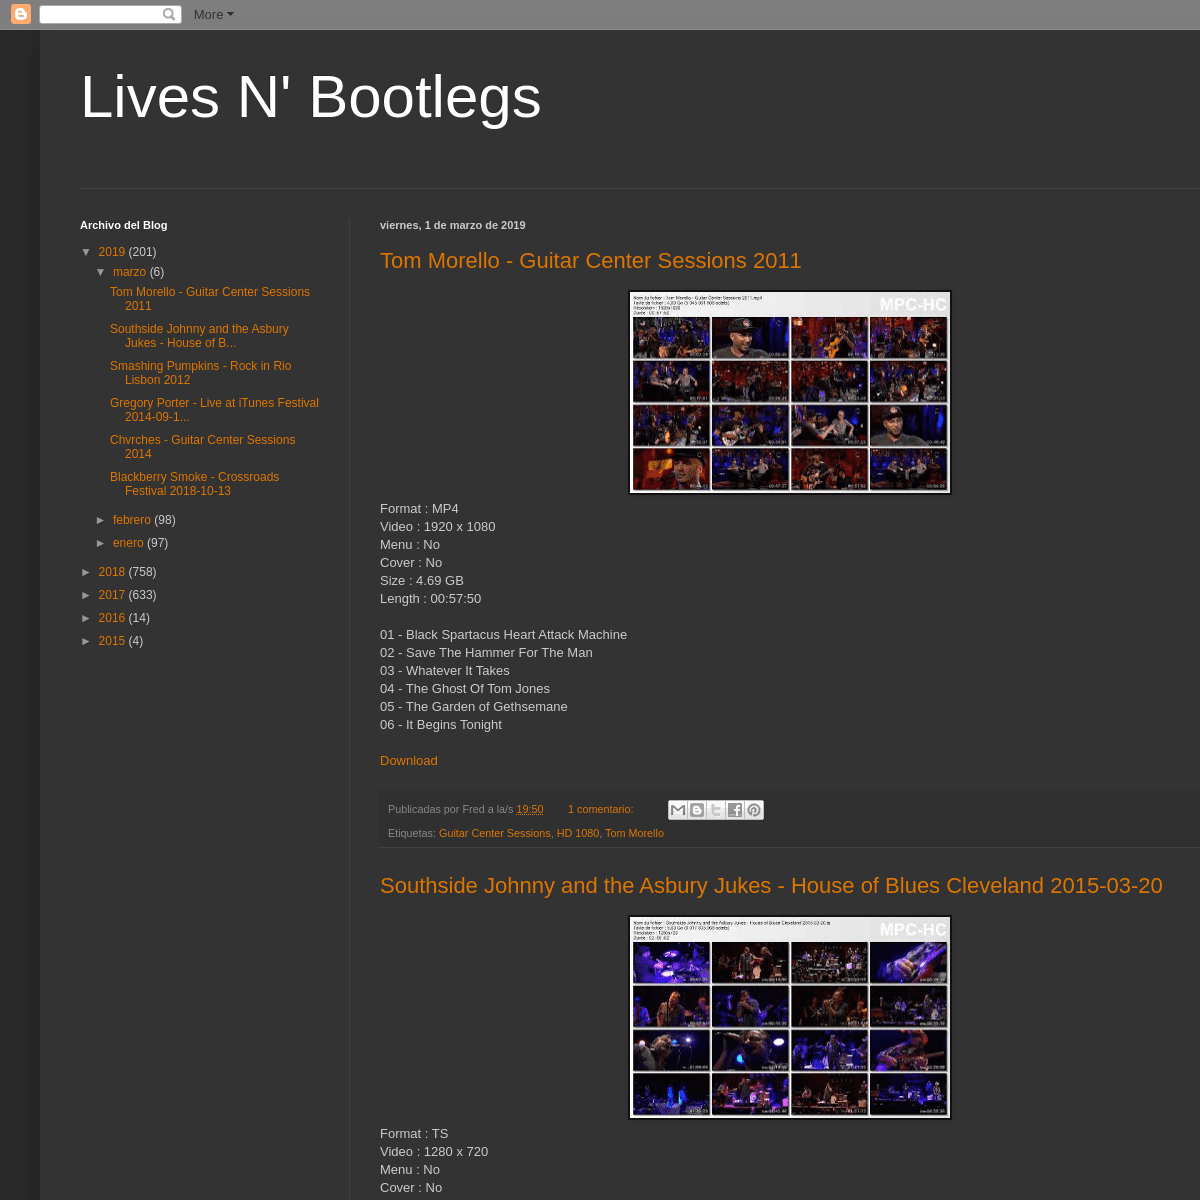 A complete backup of lives-n-bootlegs.blogspot.com